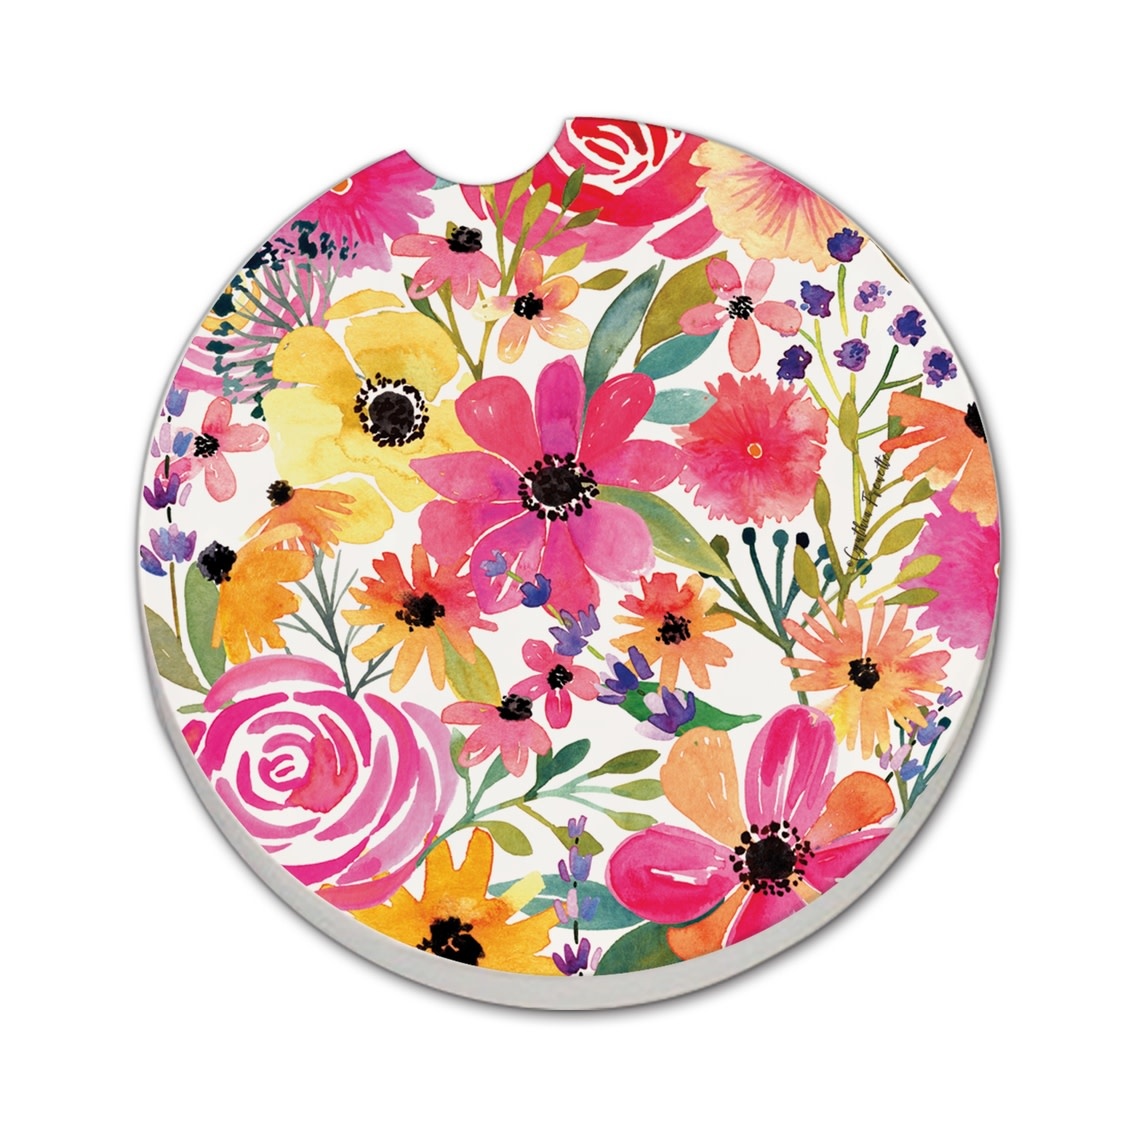 CounterArt and Highland Home "Floral Frenzy" Stone Car Coaster